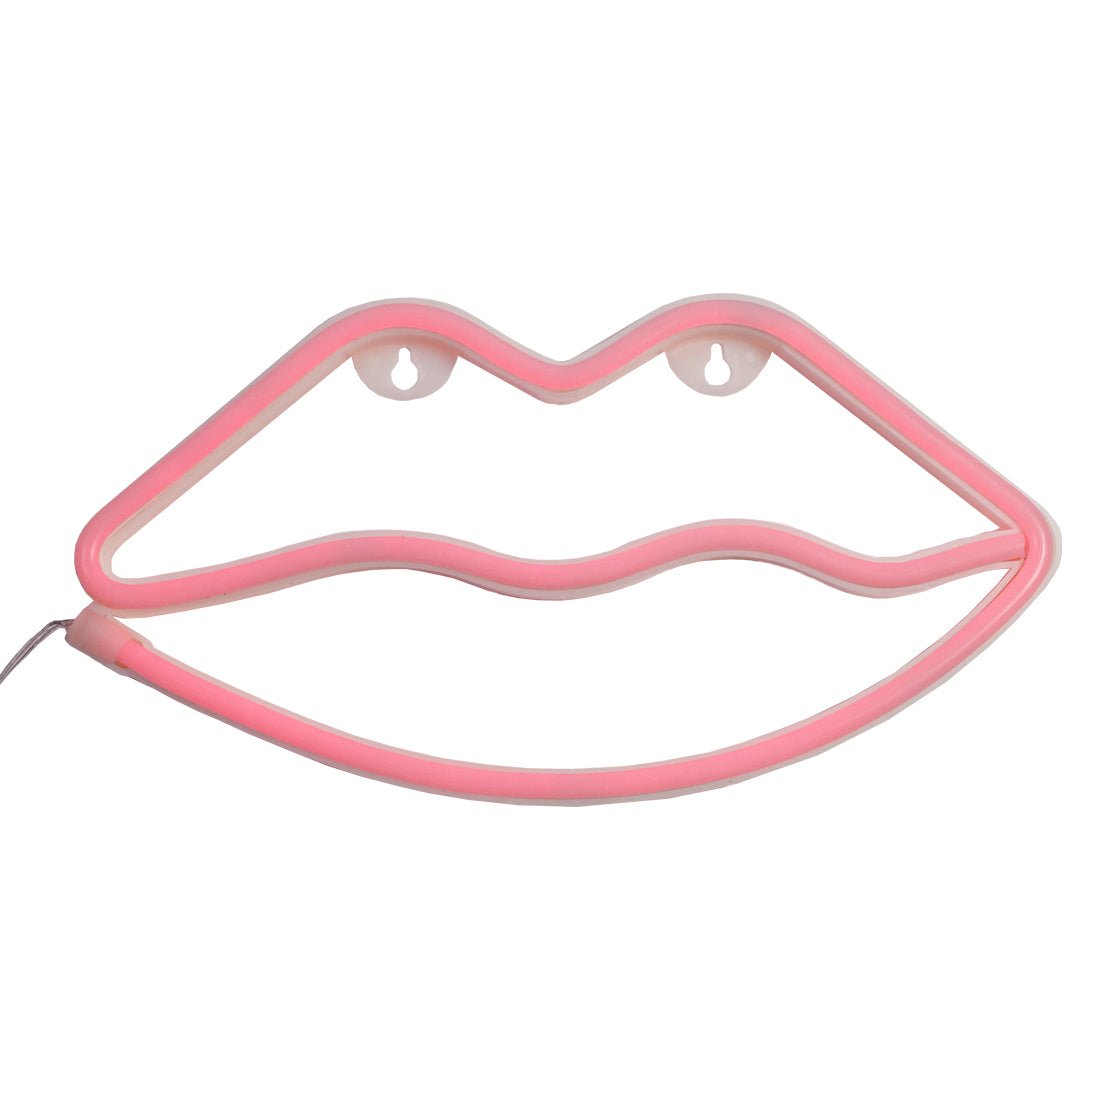 Led Neon Lips Shape - Red - Store 974 | ستور ٩٧٤